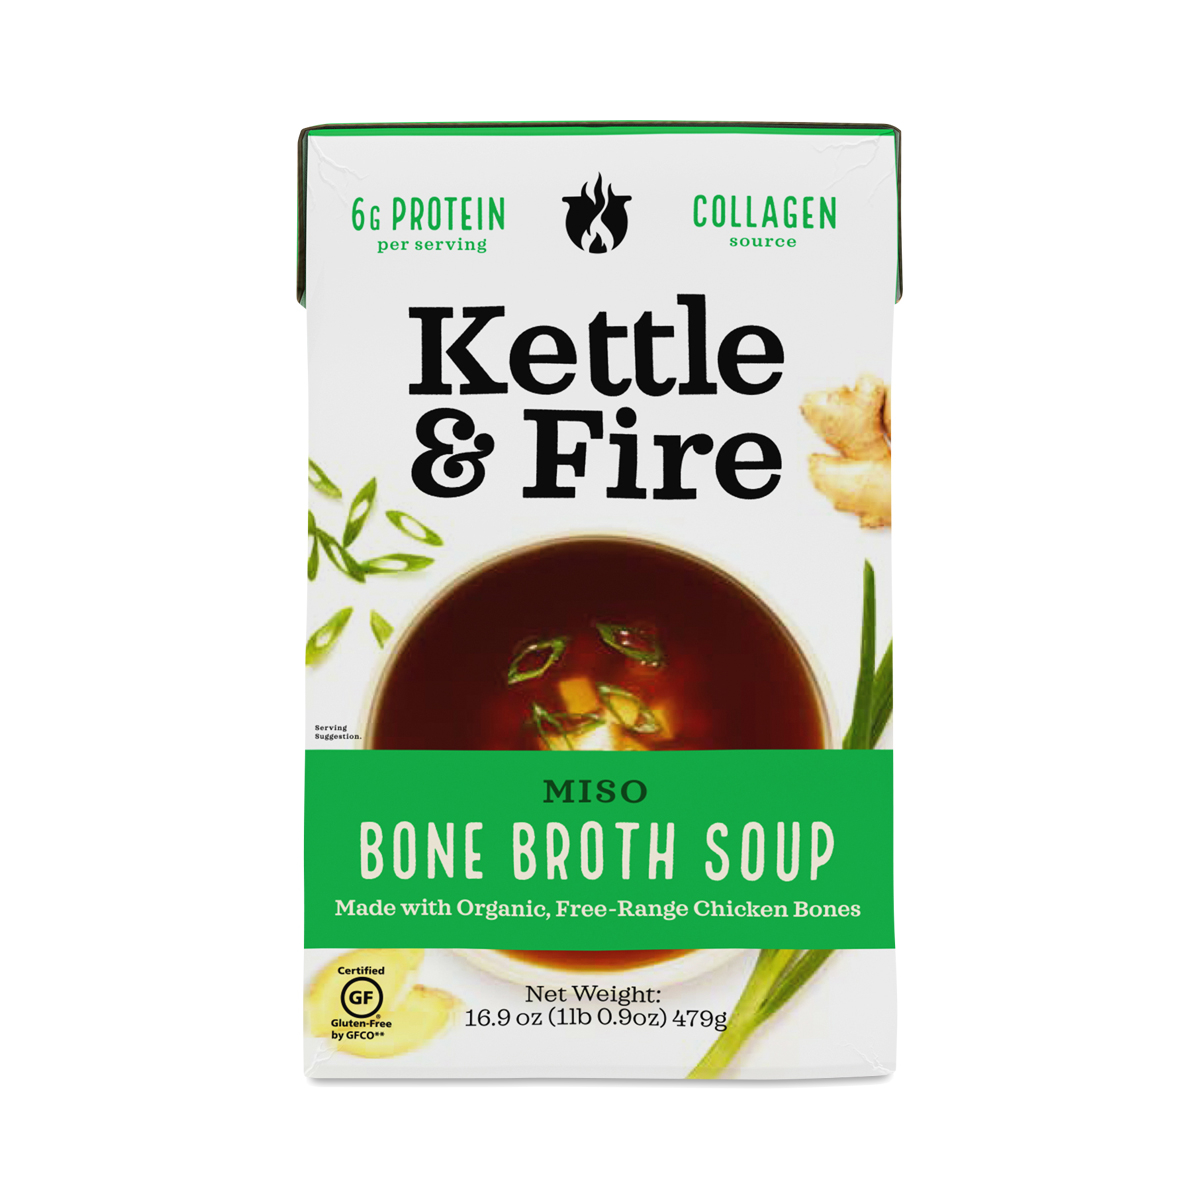 Kettle & Fire Bone Broth Soup, Miso with Chicken 16.9 oz carton